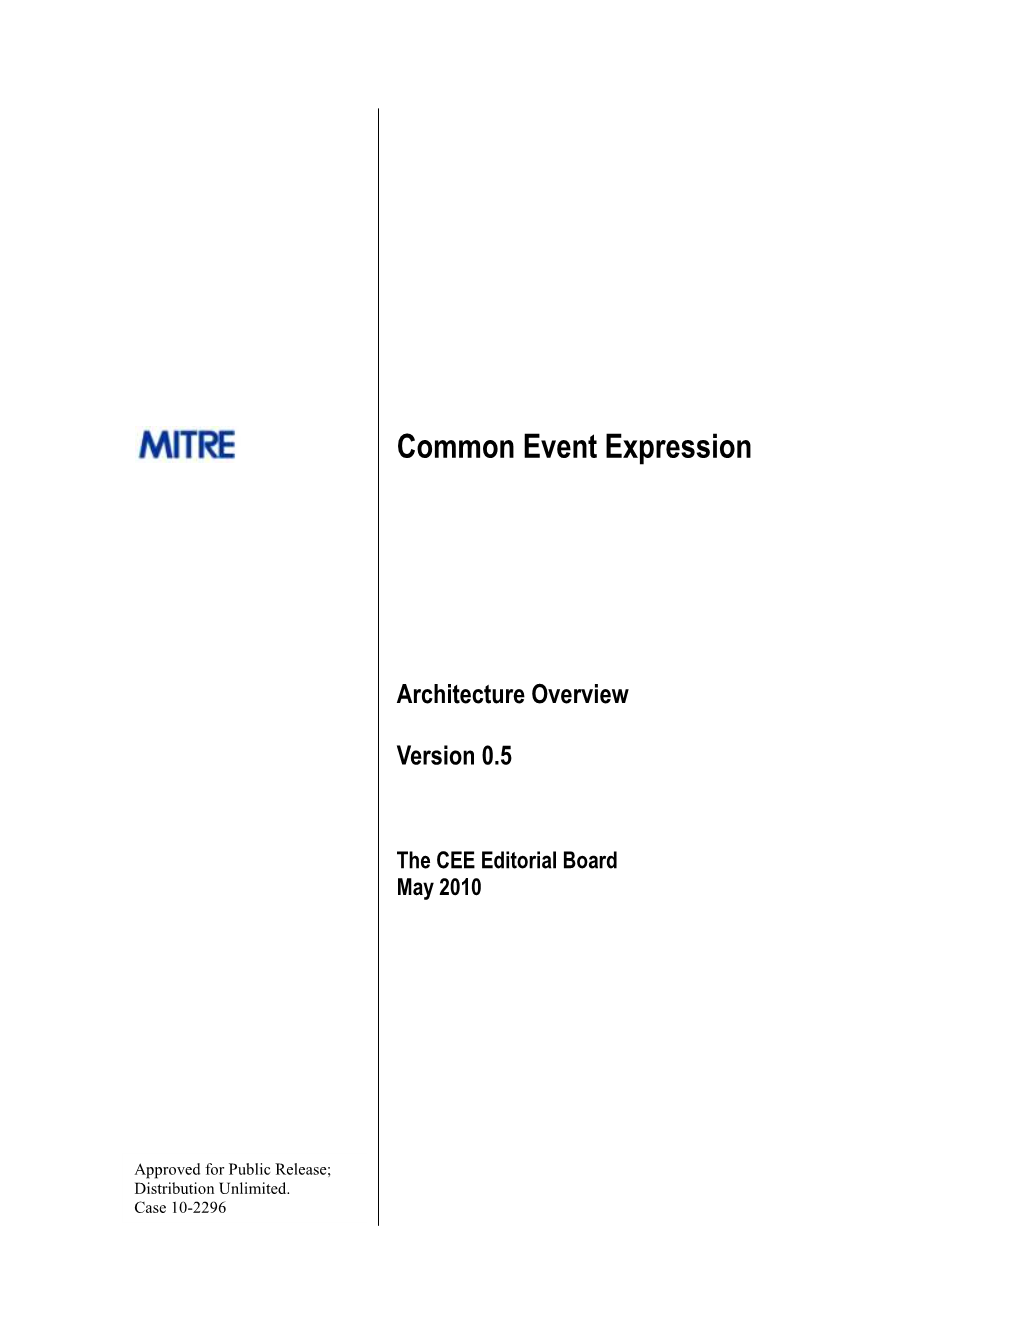 Common Event Expression (CEE™)